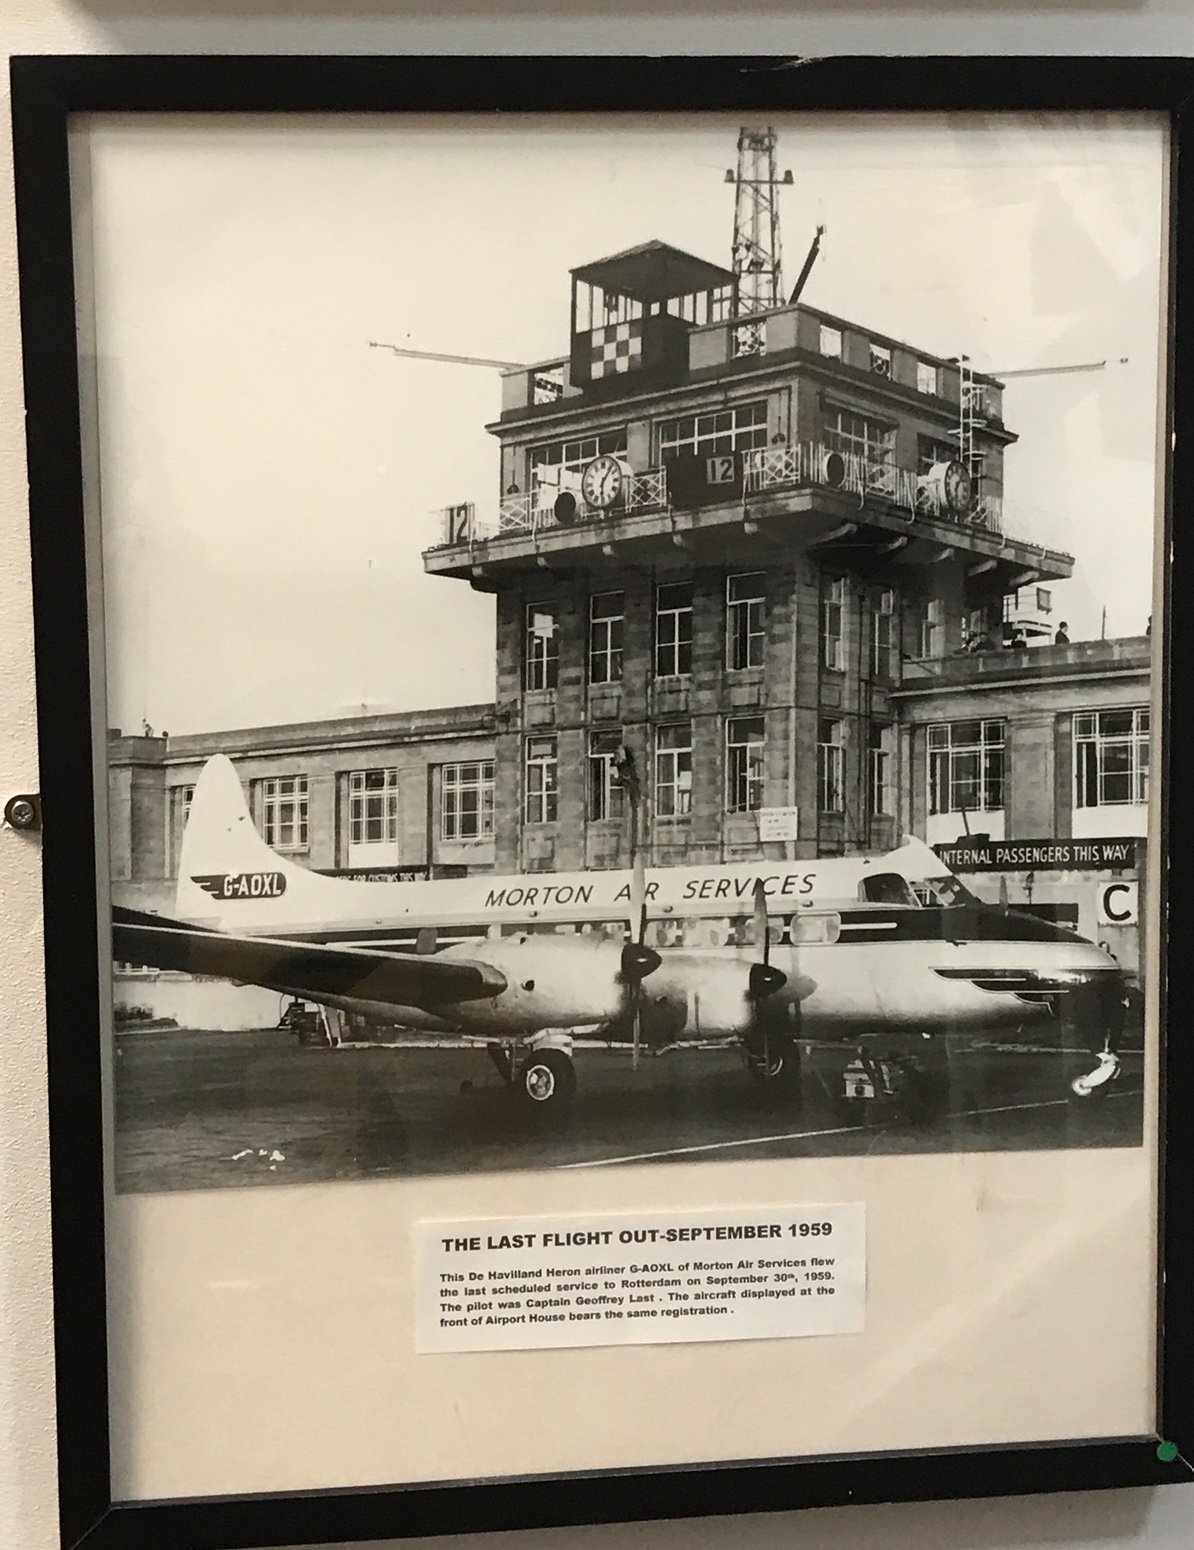 Croydon Airport: The very last airline flight out - September 1959.